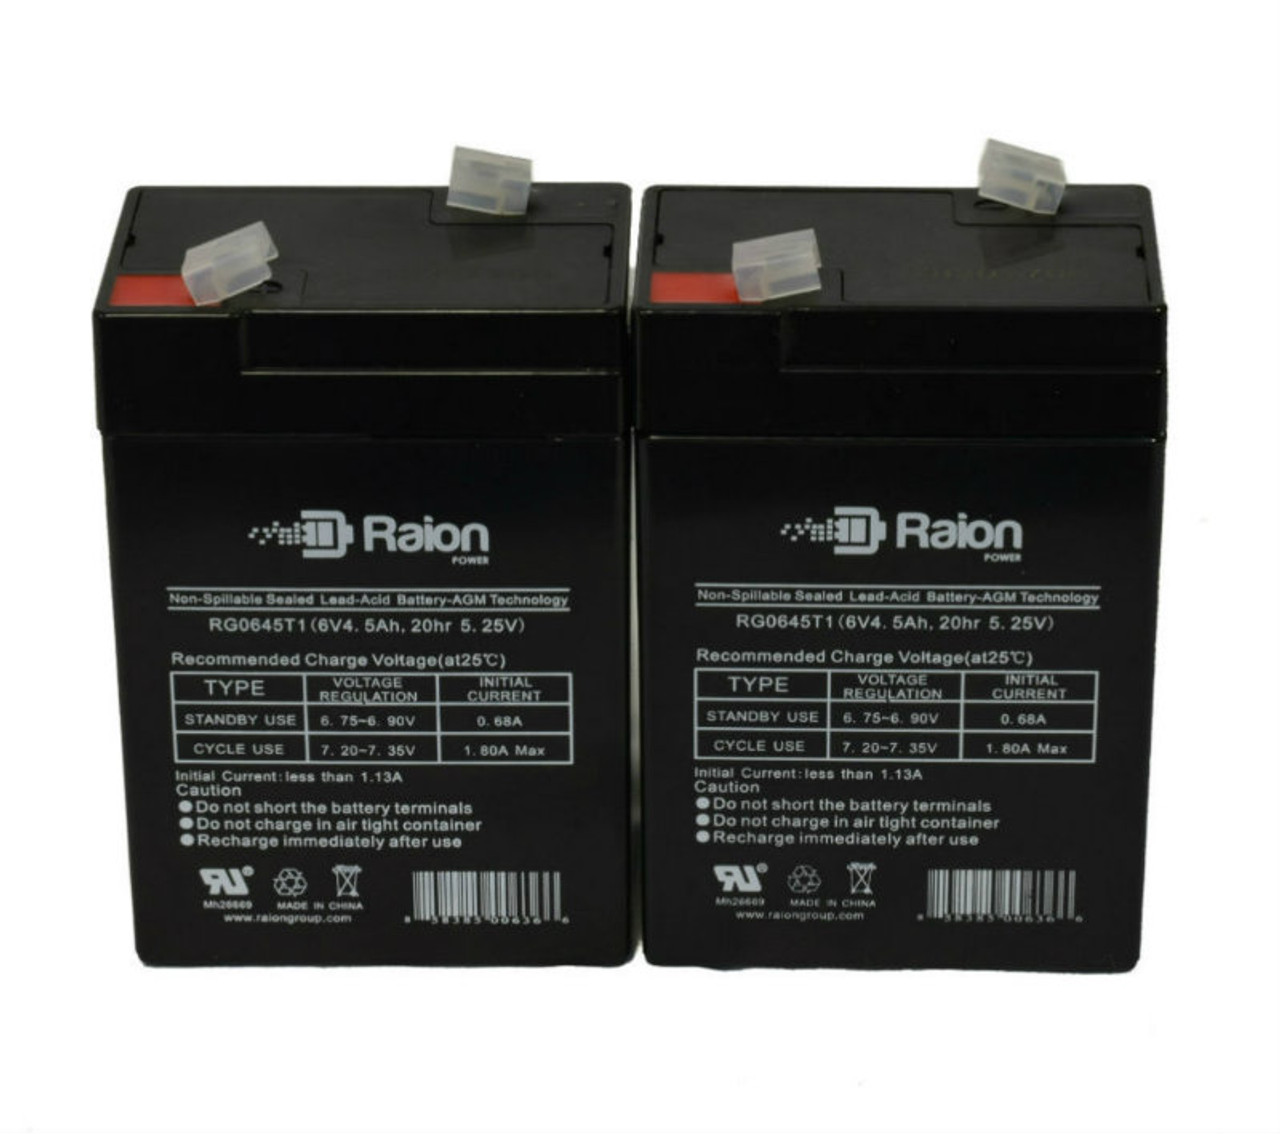 Raion Power RG0645T1 6V 4.5Ah Replacement Medical Equipment Battery for Mcgaw 521 Plus - 2 Pack